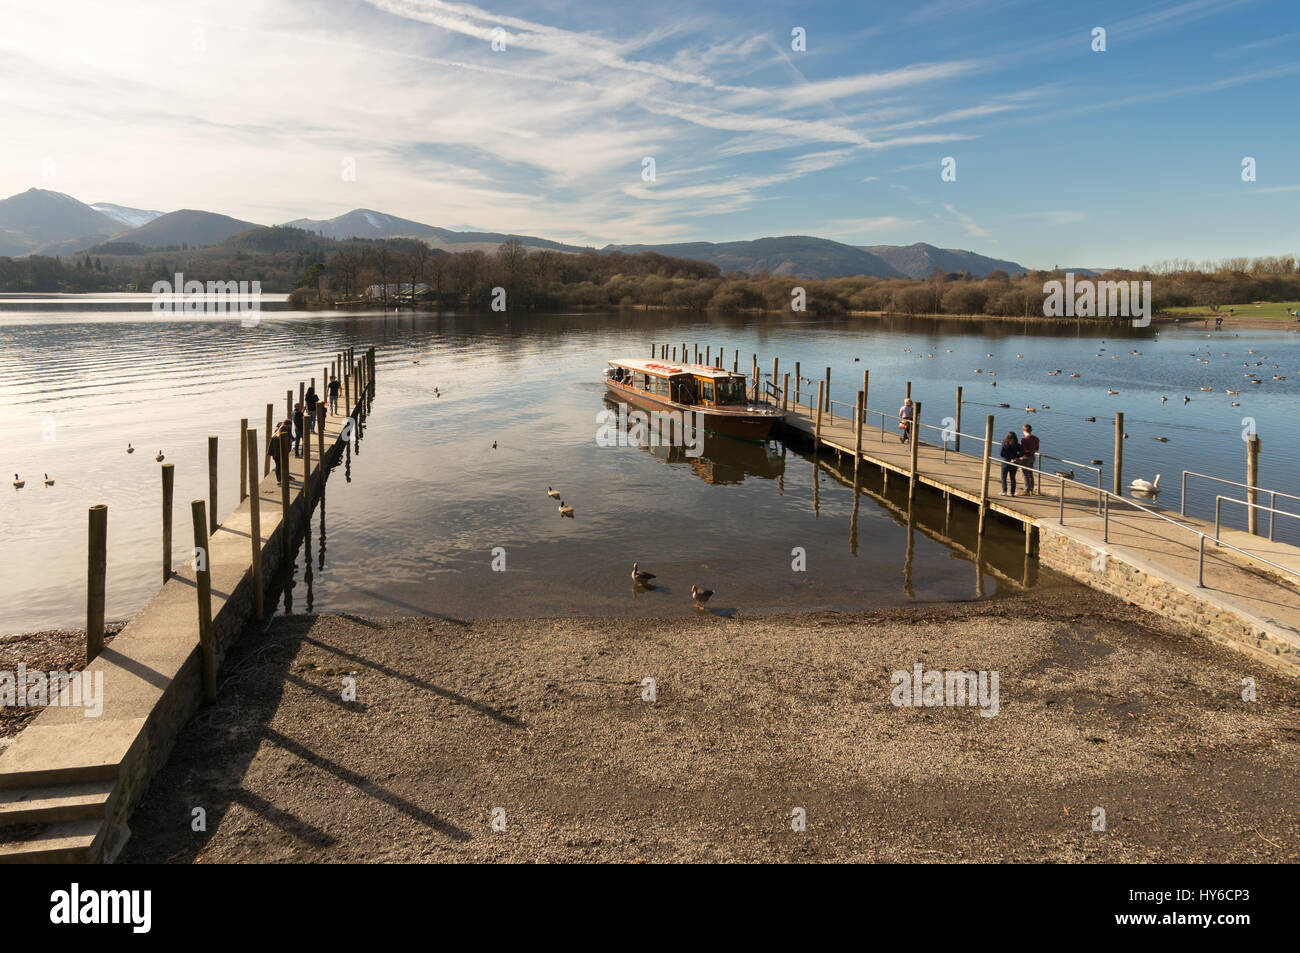 Wide angle view of the jetties on Derwentwater at Keswick with people walking towards a motor launch, Cumbria, England, UK Stock Photo